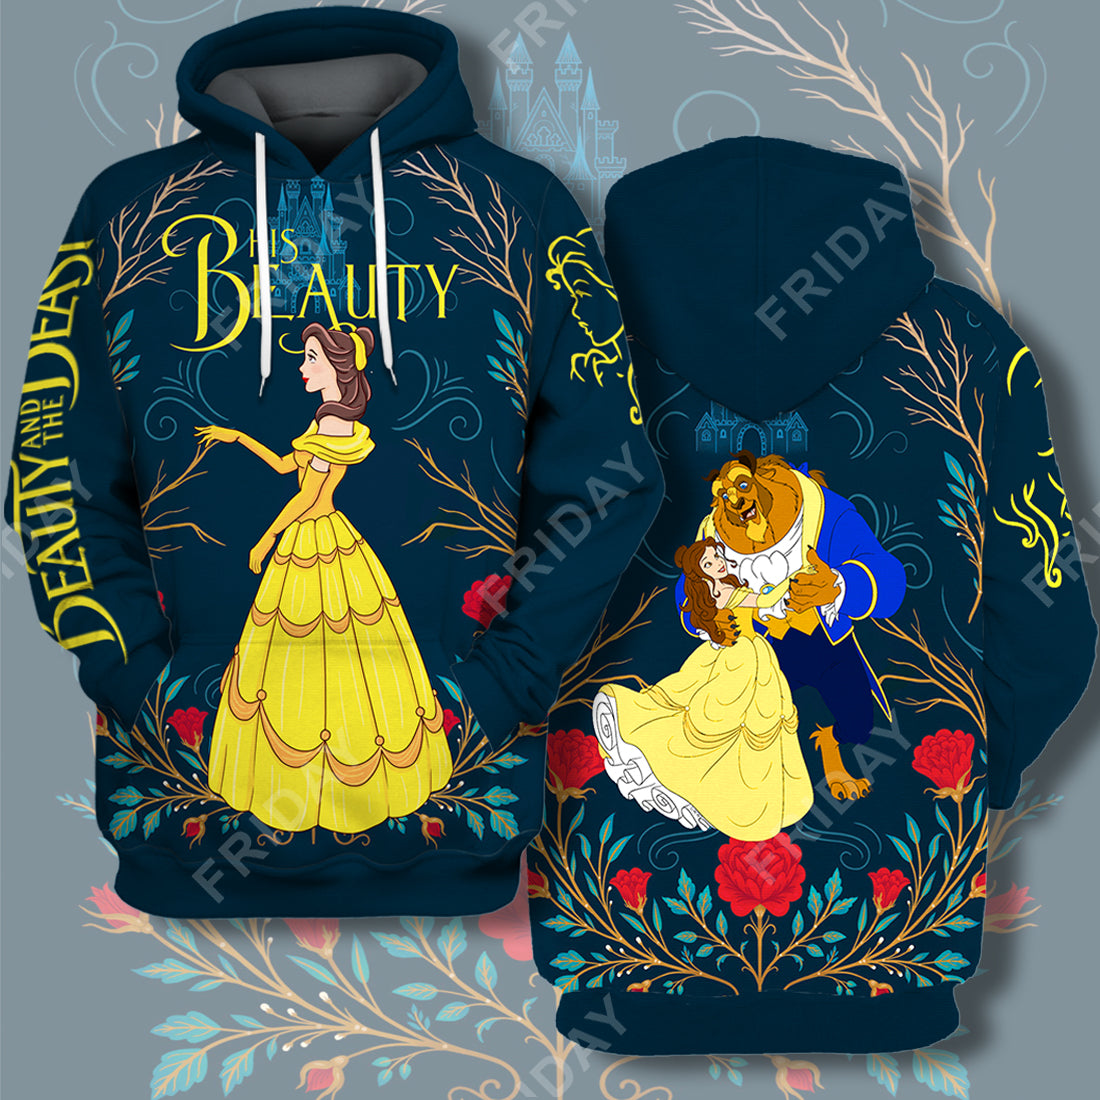 Unifinz DN T-shirt Beauty & The Beast His Beauty Couple 3D Print T-shirt Awesome DN Beauty & The Beast Hoodie Sweater Tank 2023